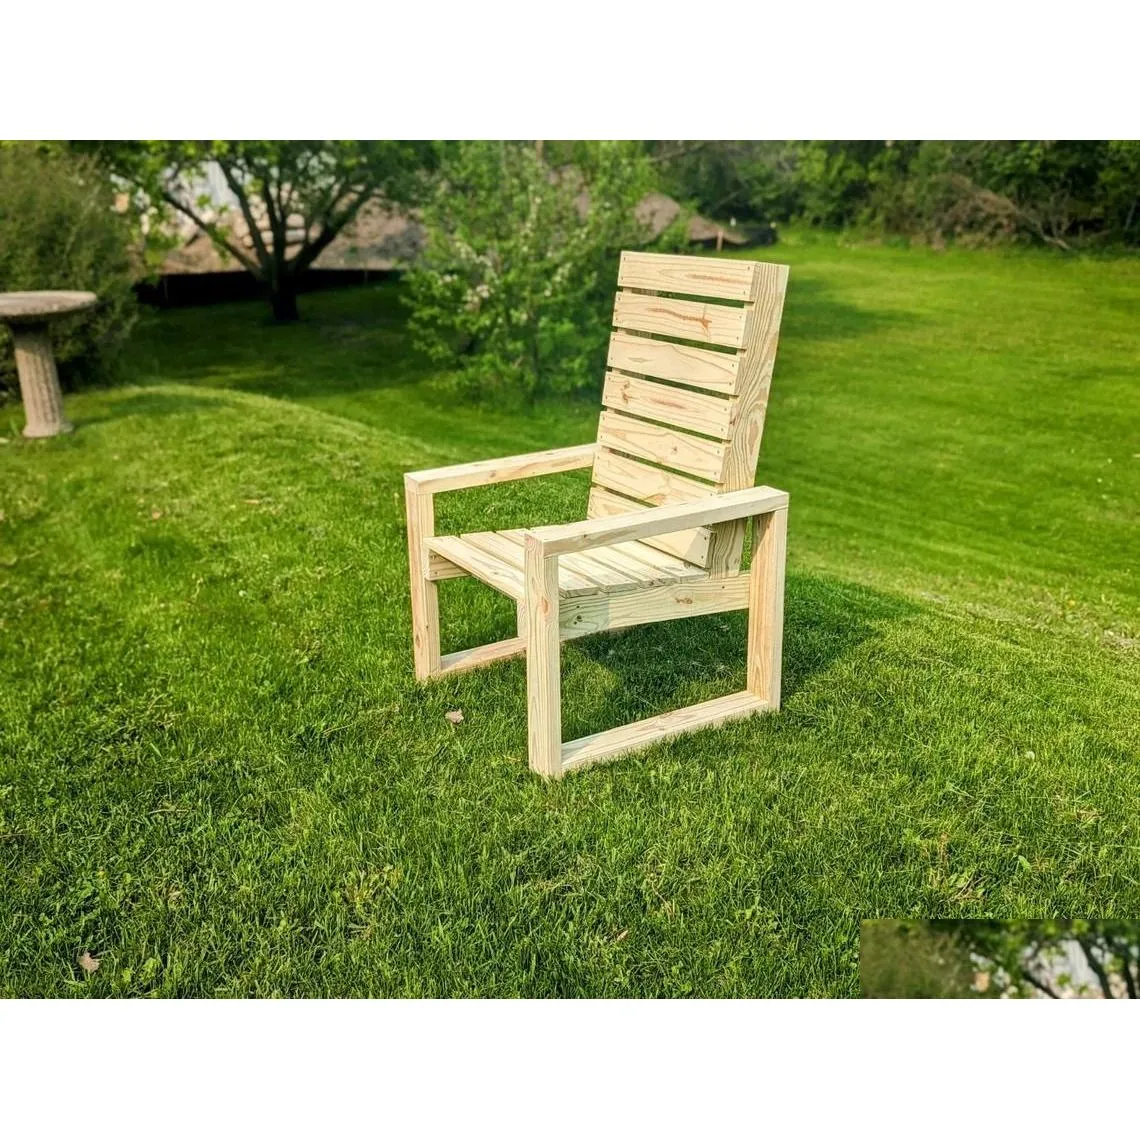 Other Furniture Diy Patio Chair Woodworking Drop Delivery Home Garden Furniture Othpo